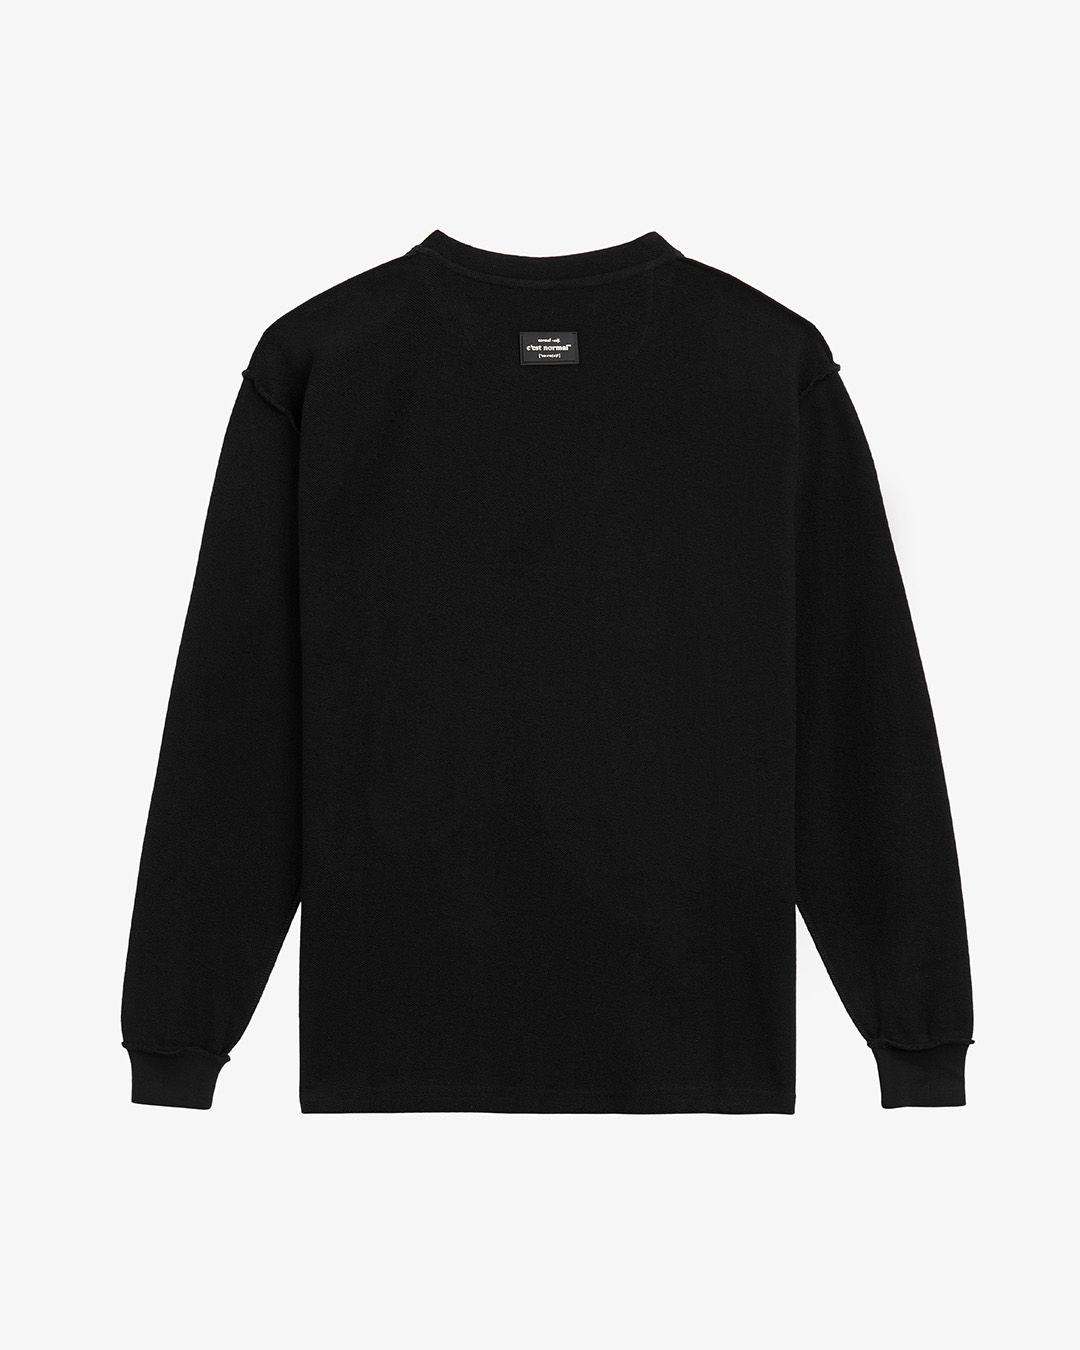 The Inside Out Long Sleeve T-Shirt